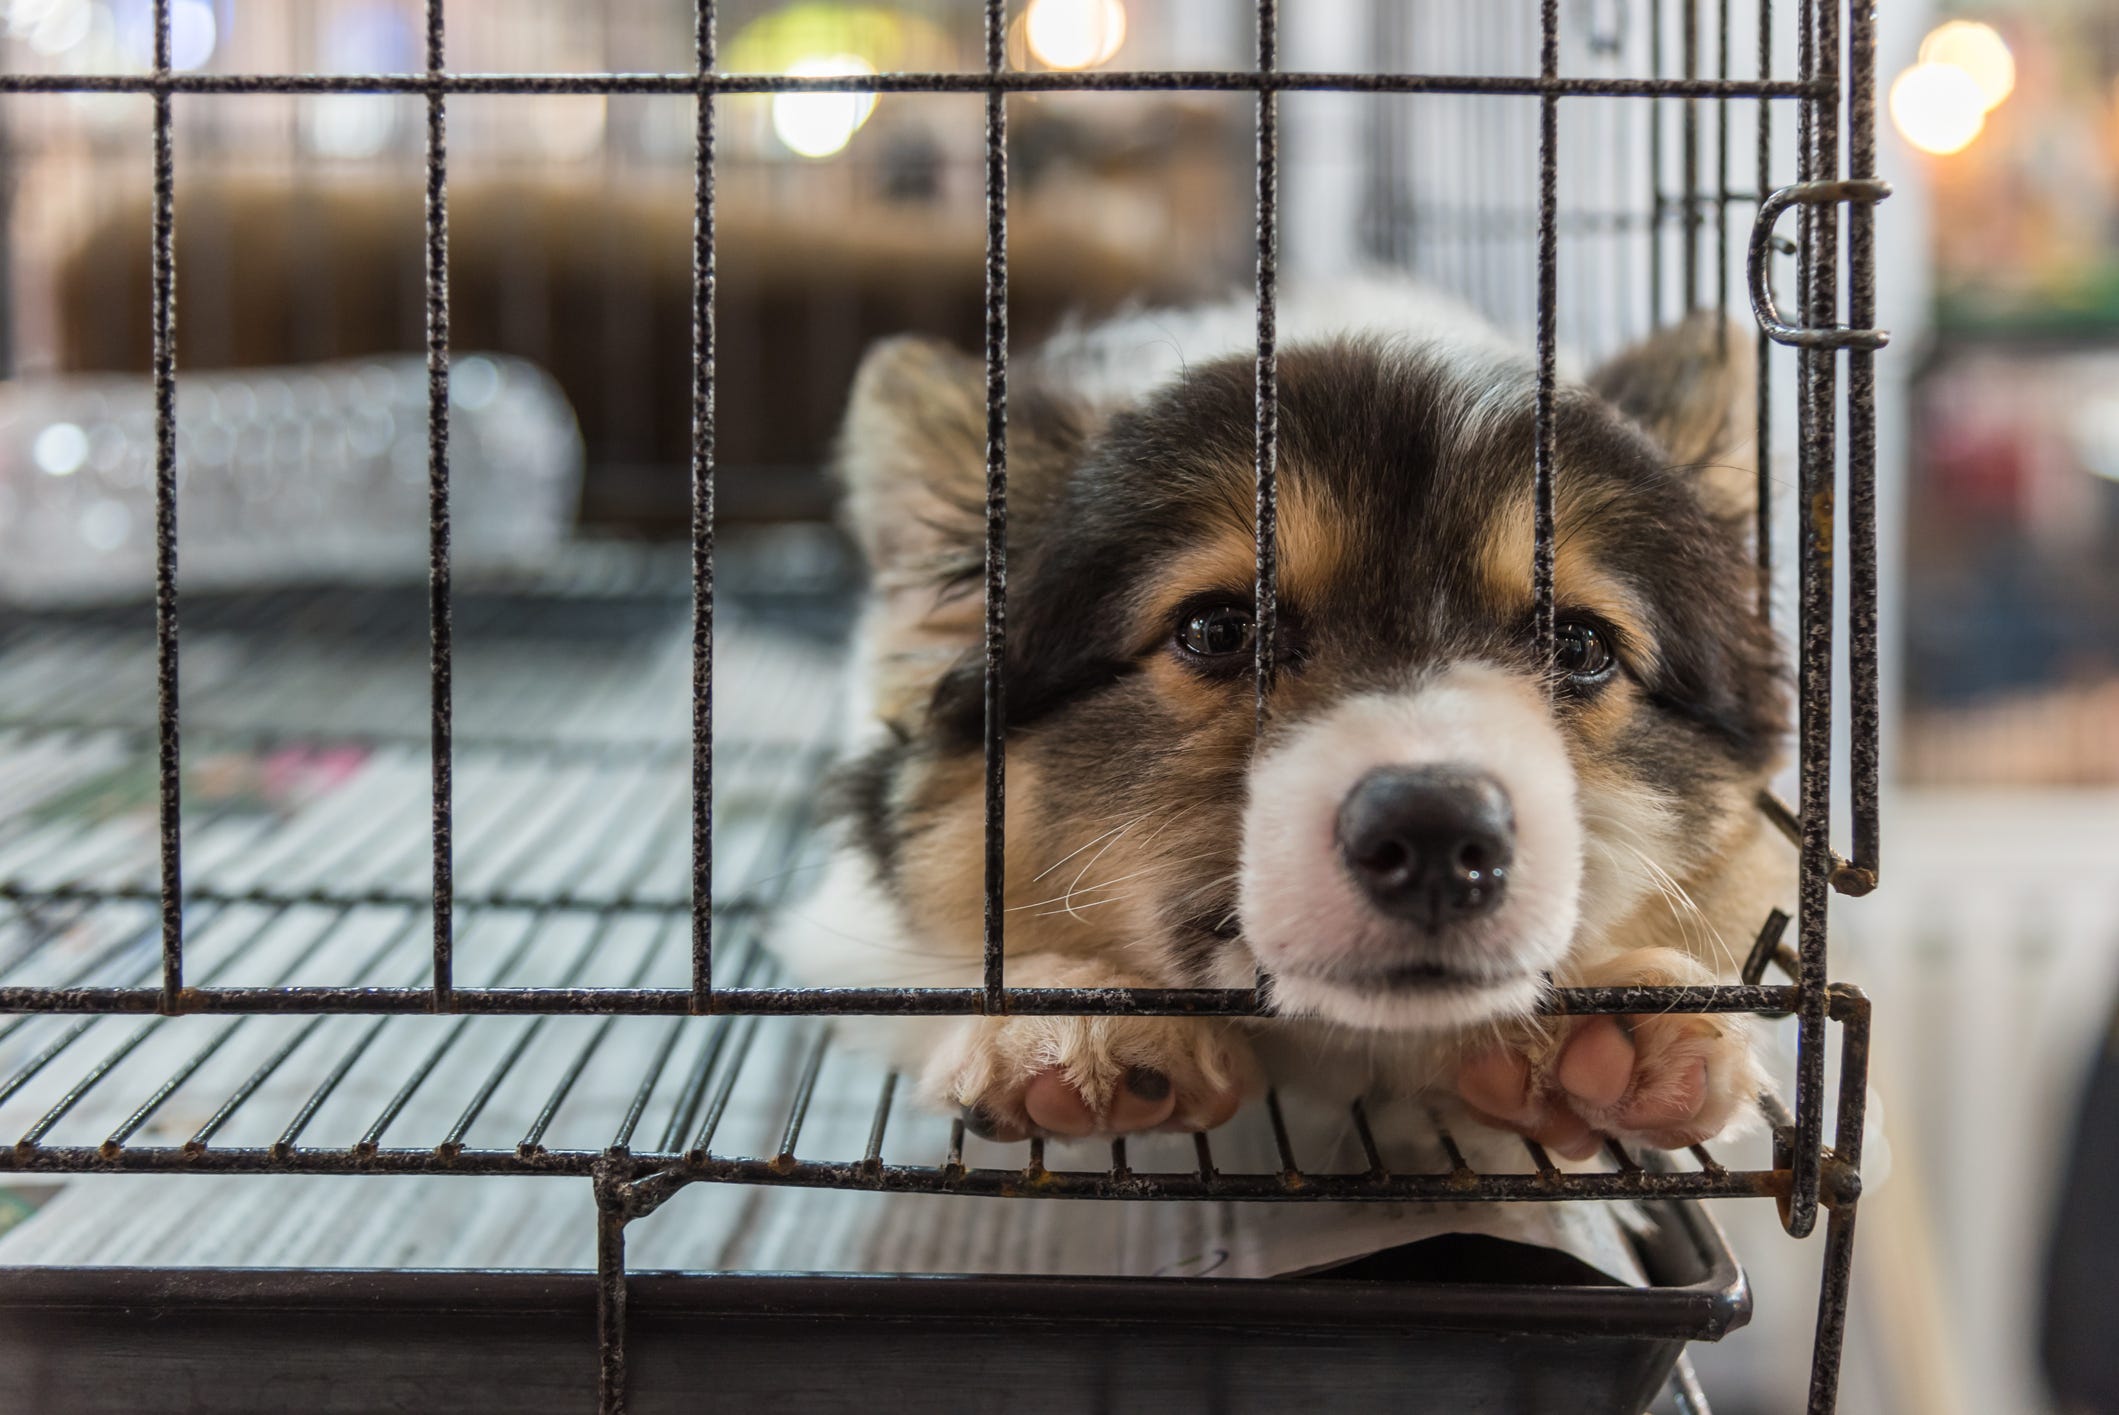 Appleton Targets Puppy Mills Bans Sale Of Dogs Cats At Pet Stores